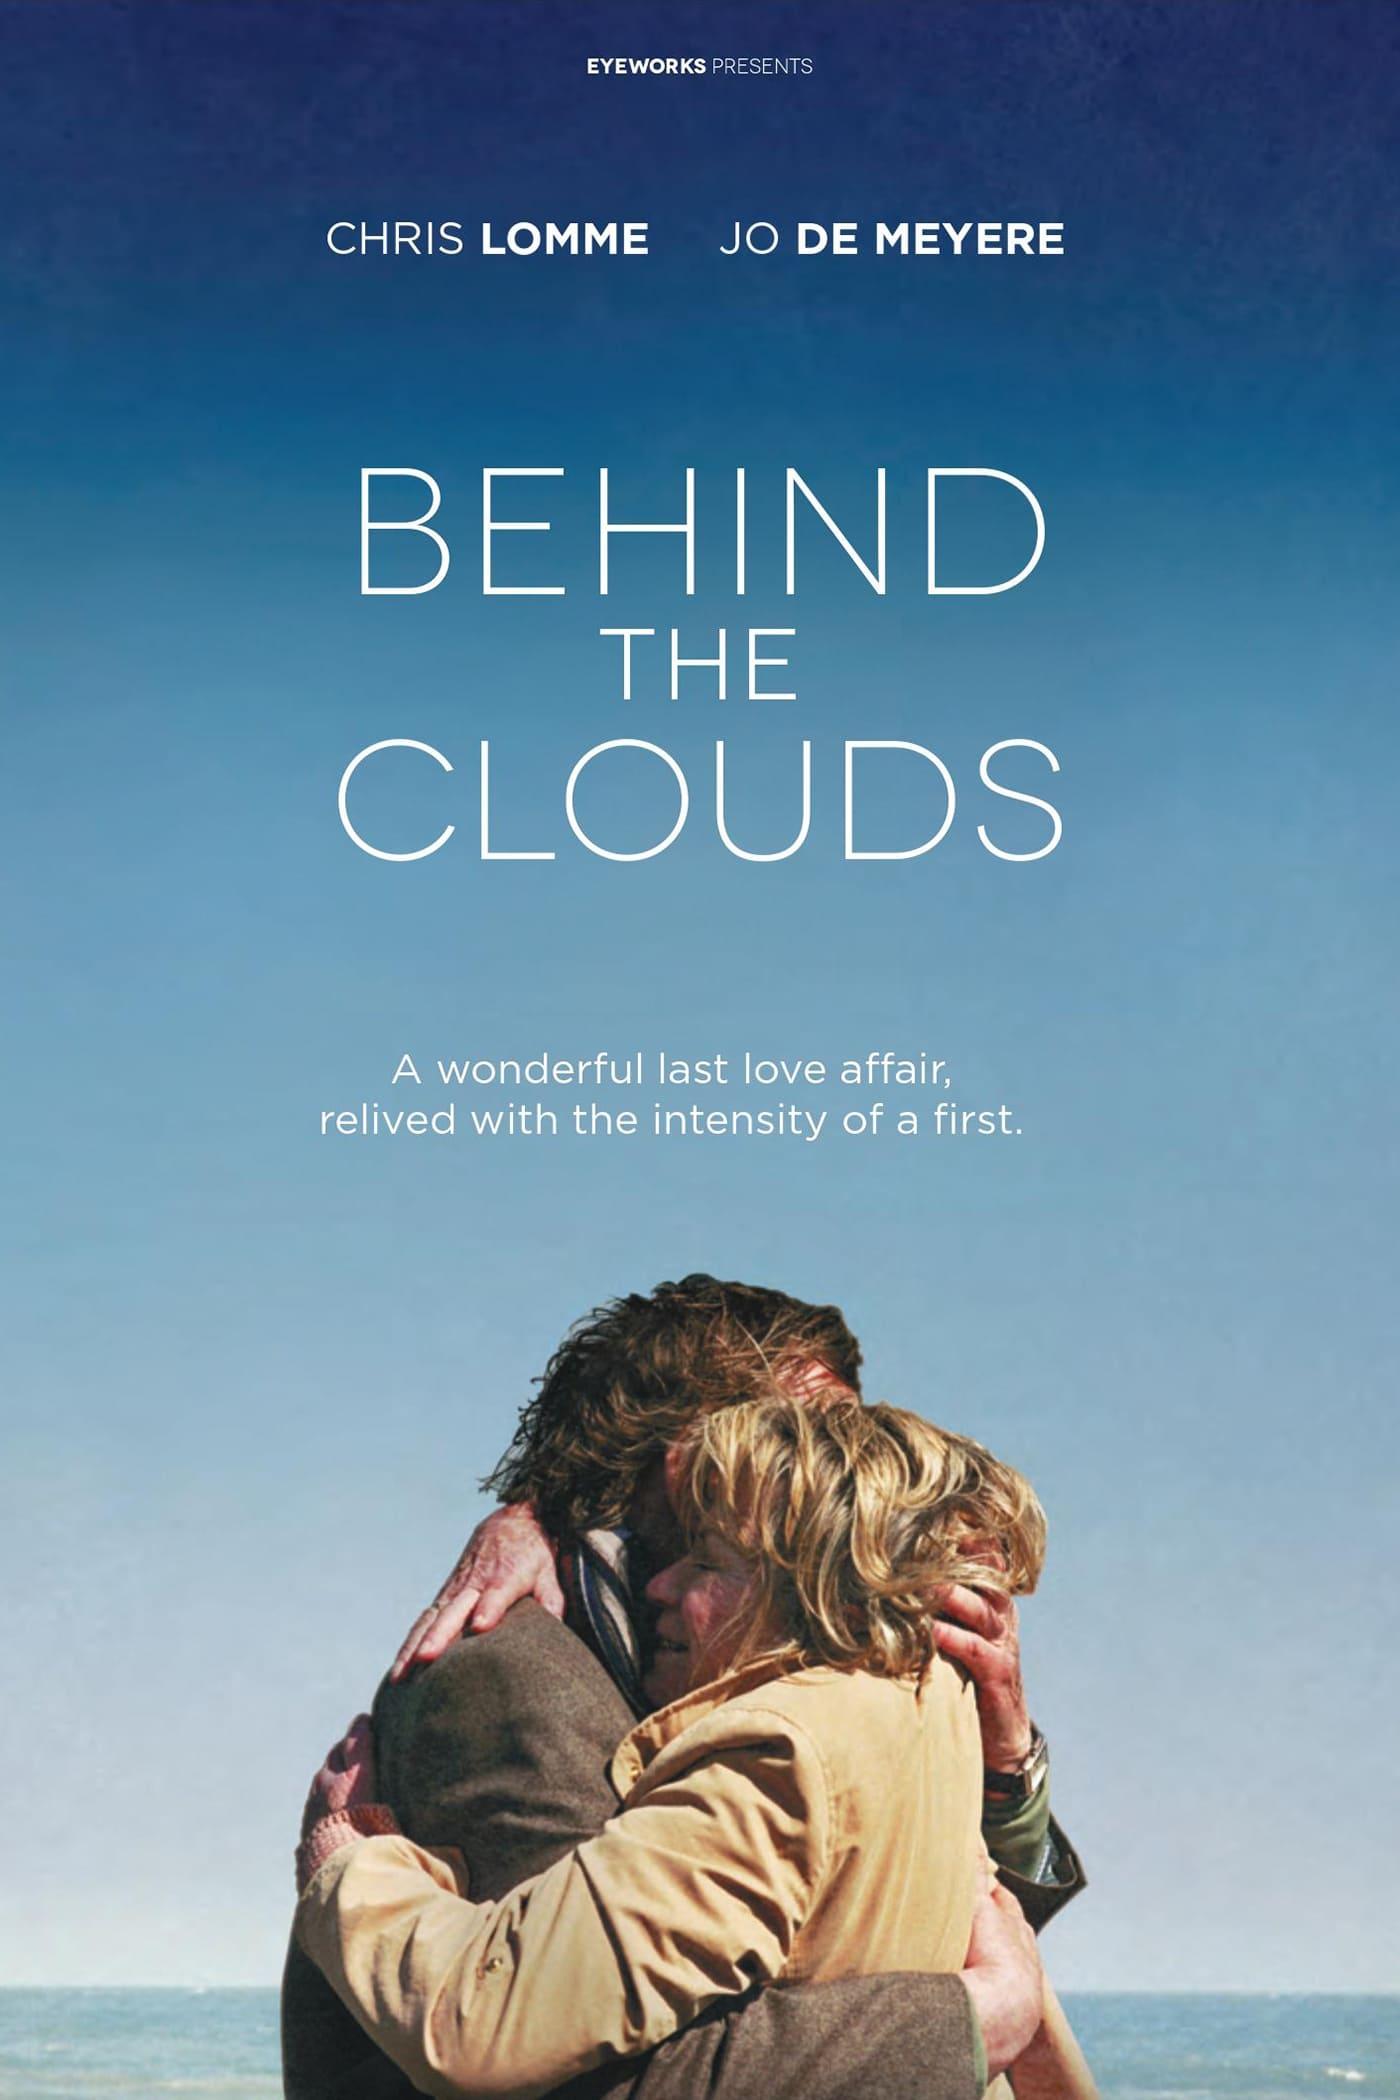 Behind the Clouds poster